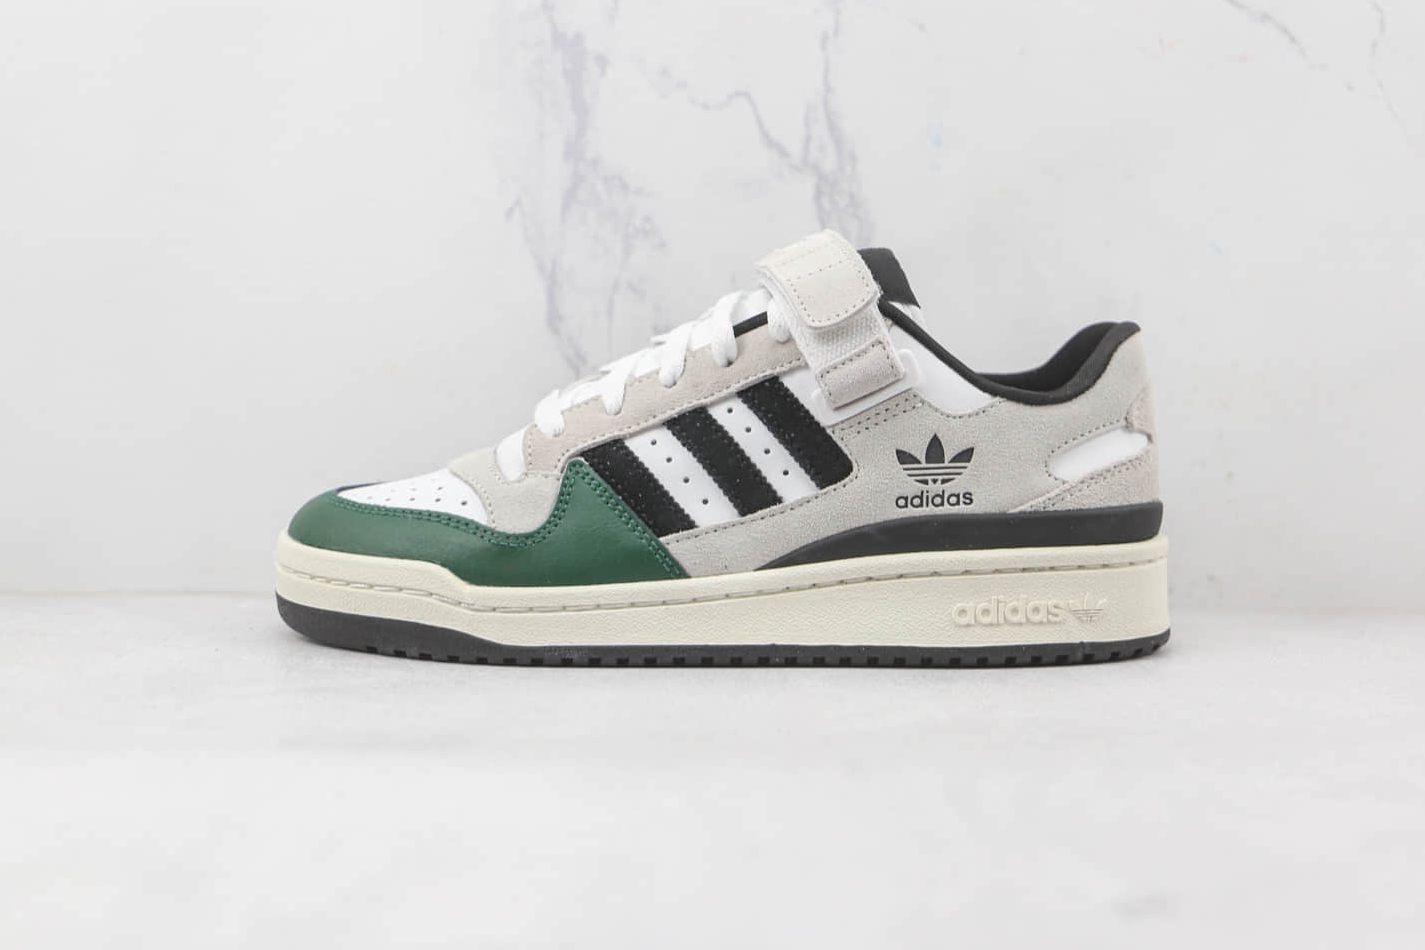 Adidas Originals Forum Low GY8203 | Shop Quality Sneakers